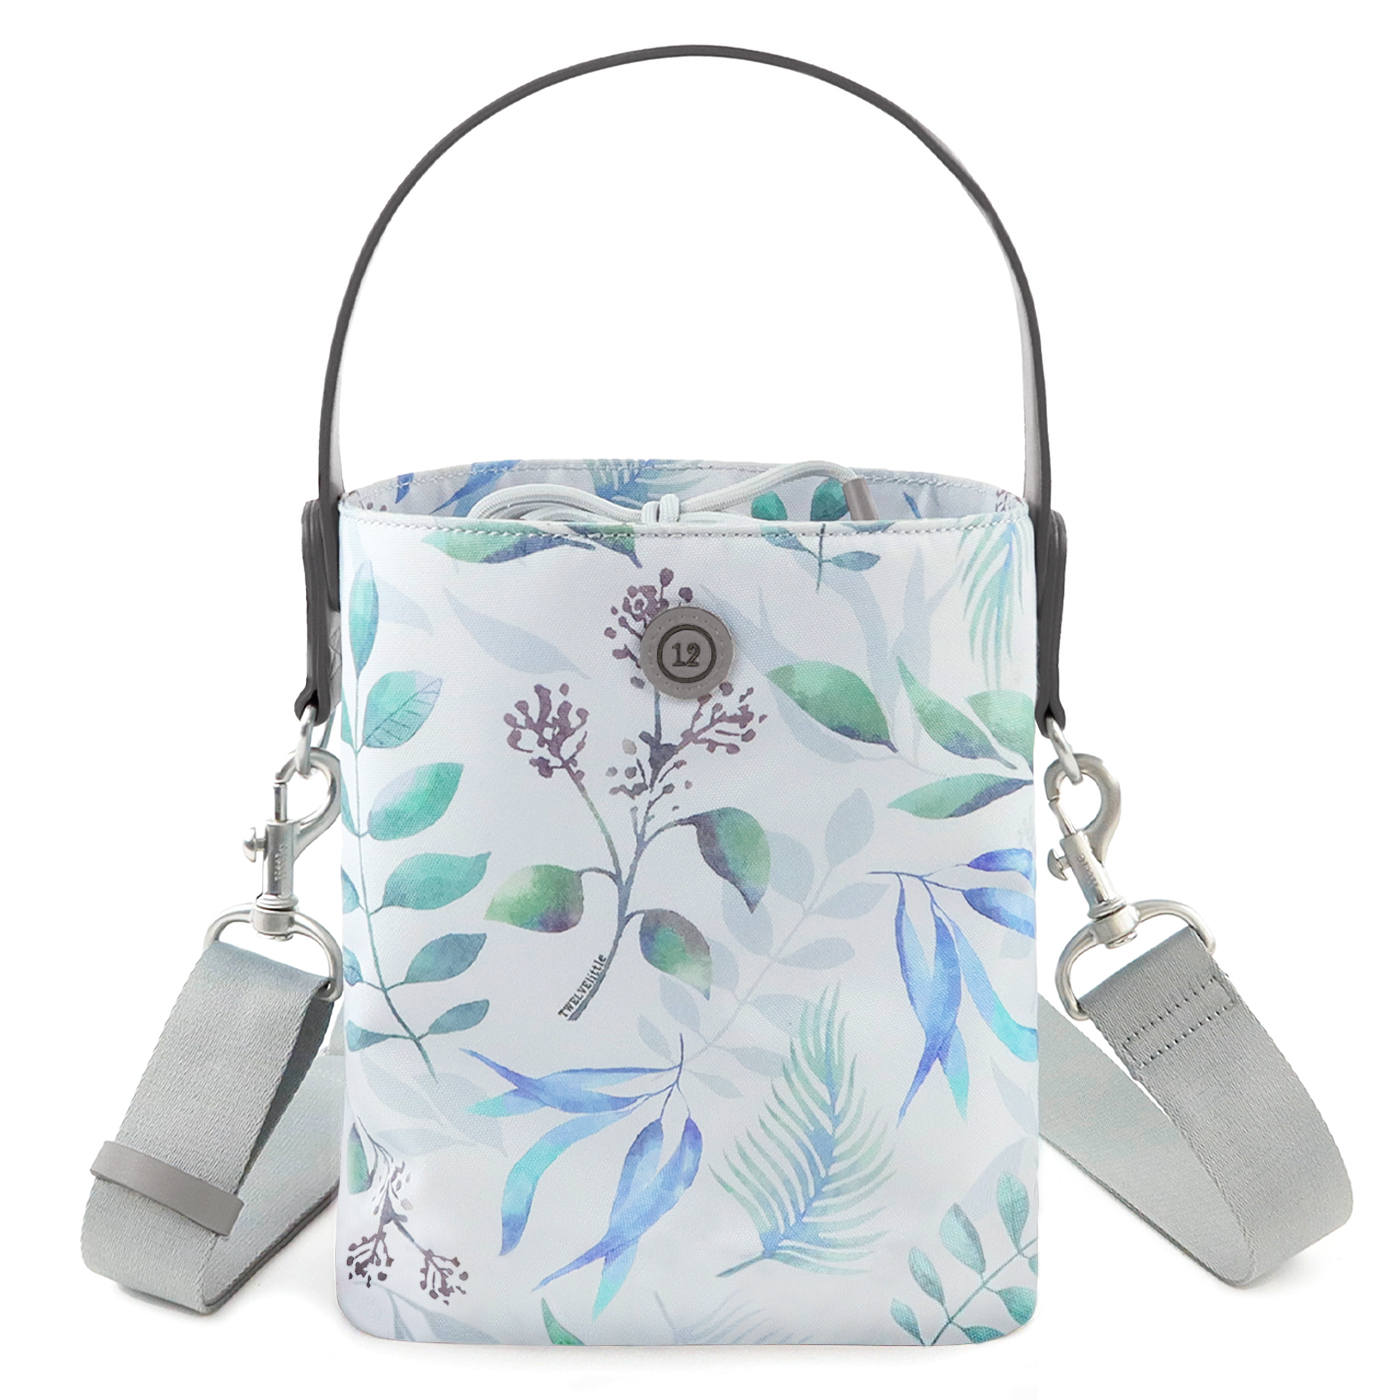 ON-THE GO Insulated Bottle Bag - Leaf